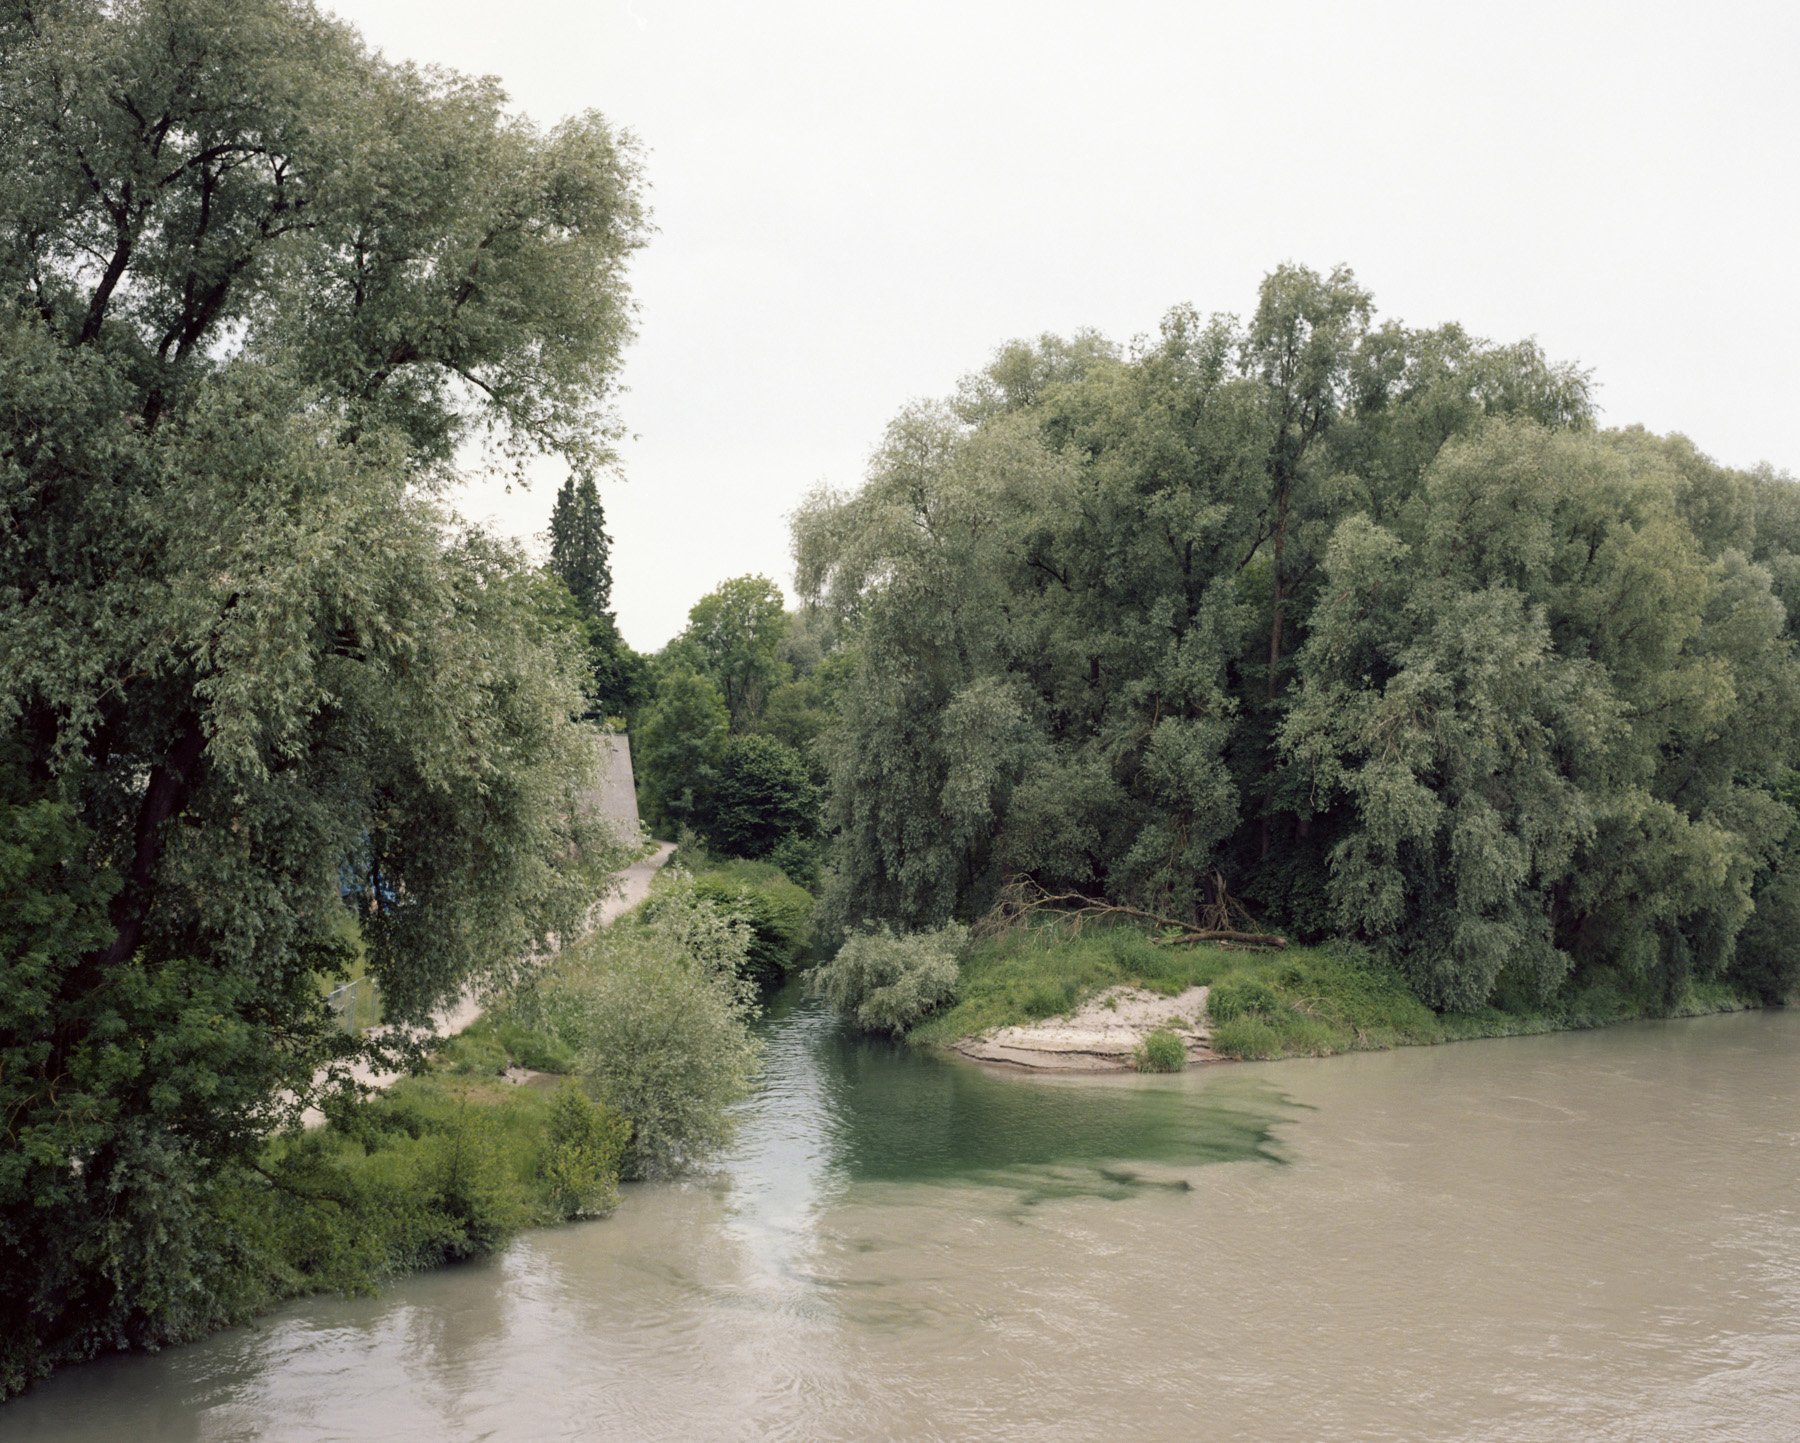  Austria, Braunau am Inn. 2019. The Confluence between the Enknach River and the Inn River in Braunau an Inn. Braunau is an Austrian city that became famous to be Hitler’s birthplace. I recent year Hitler’s birth house became a meeting point for neo-